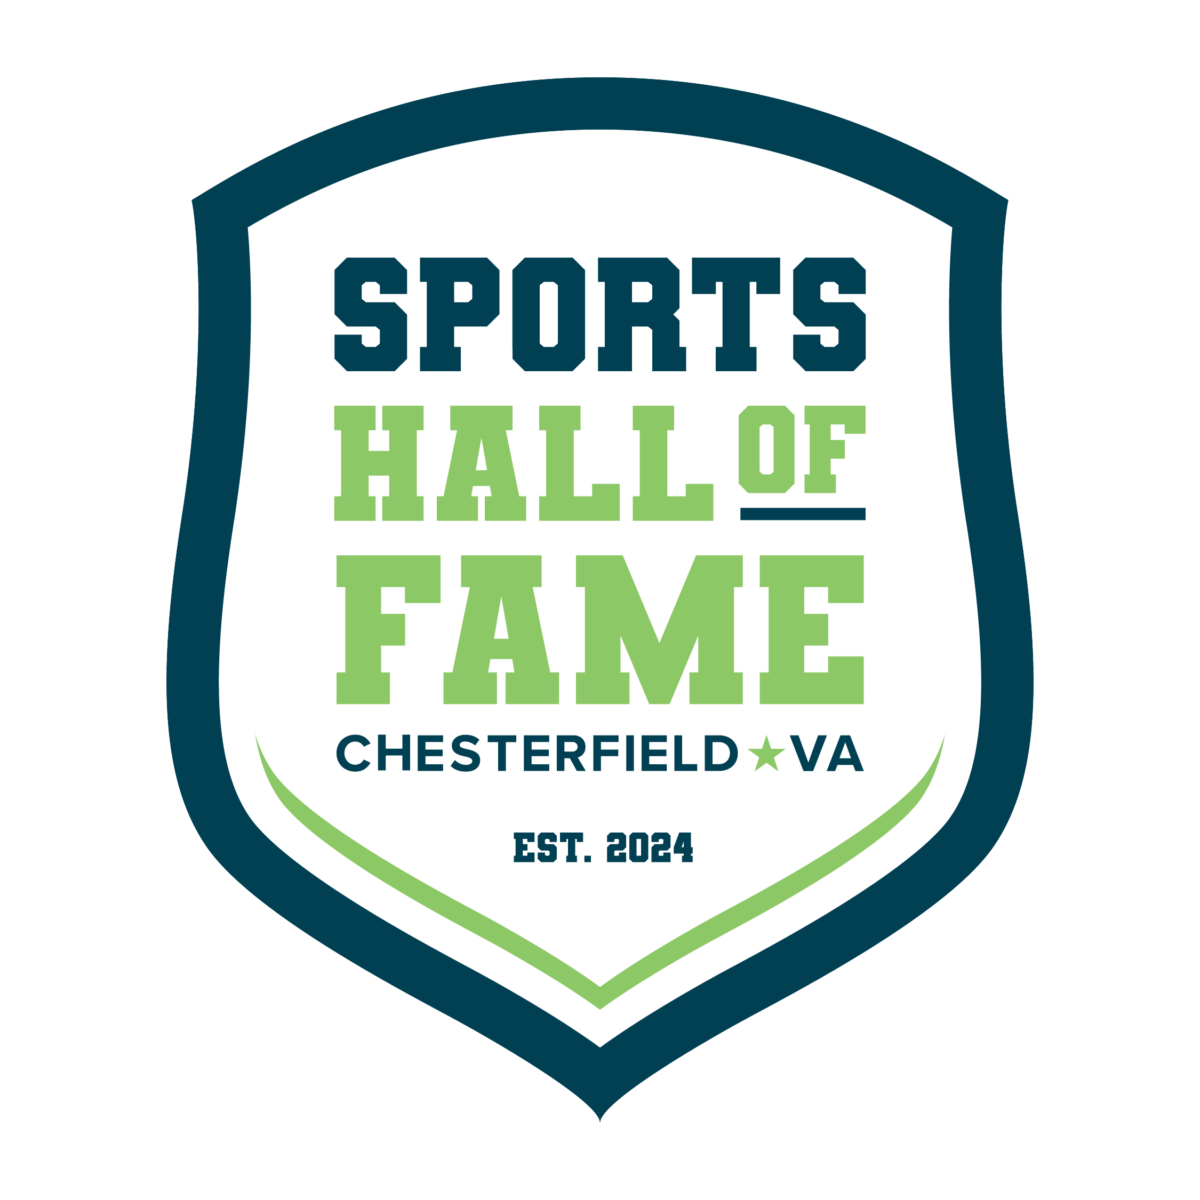 Chesterfield Sports Hall of Fame